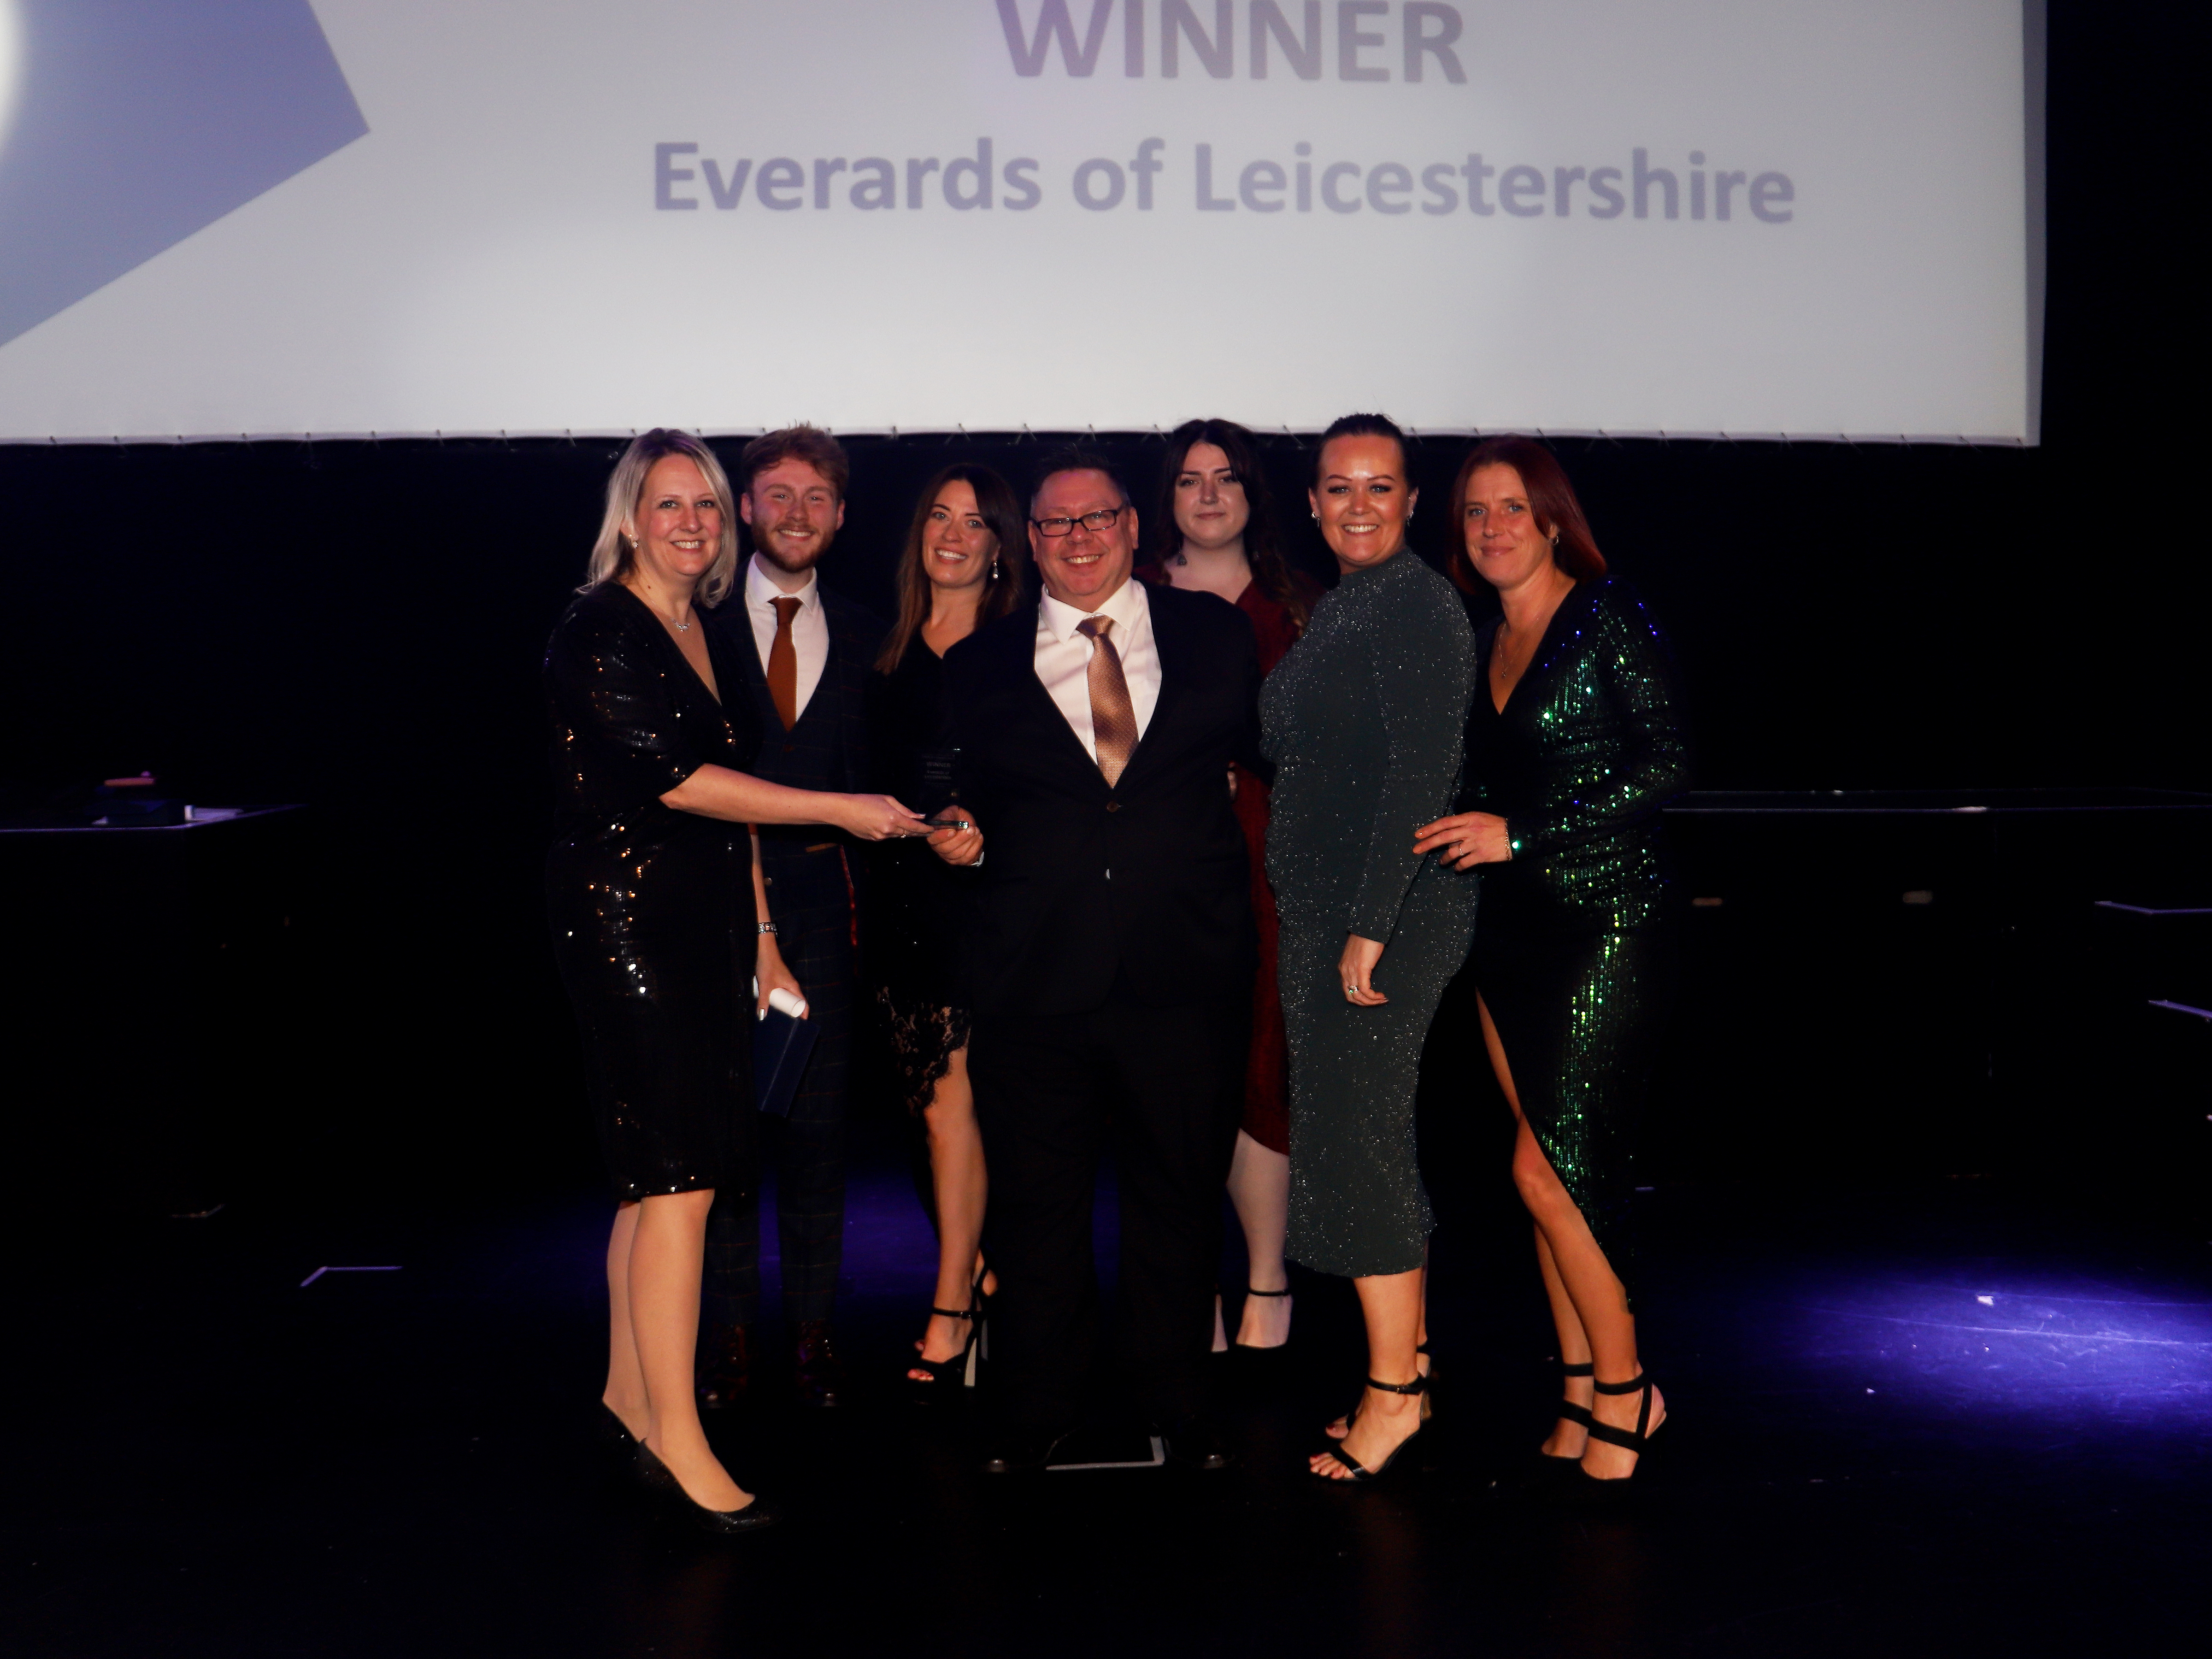 Everards of Leicestershire - WINNER - Putting Leicestershire on the Map